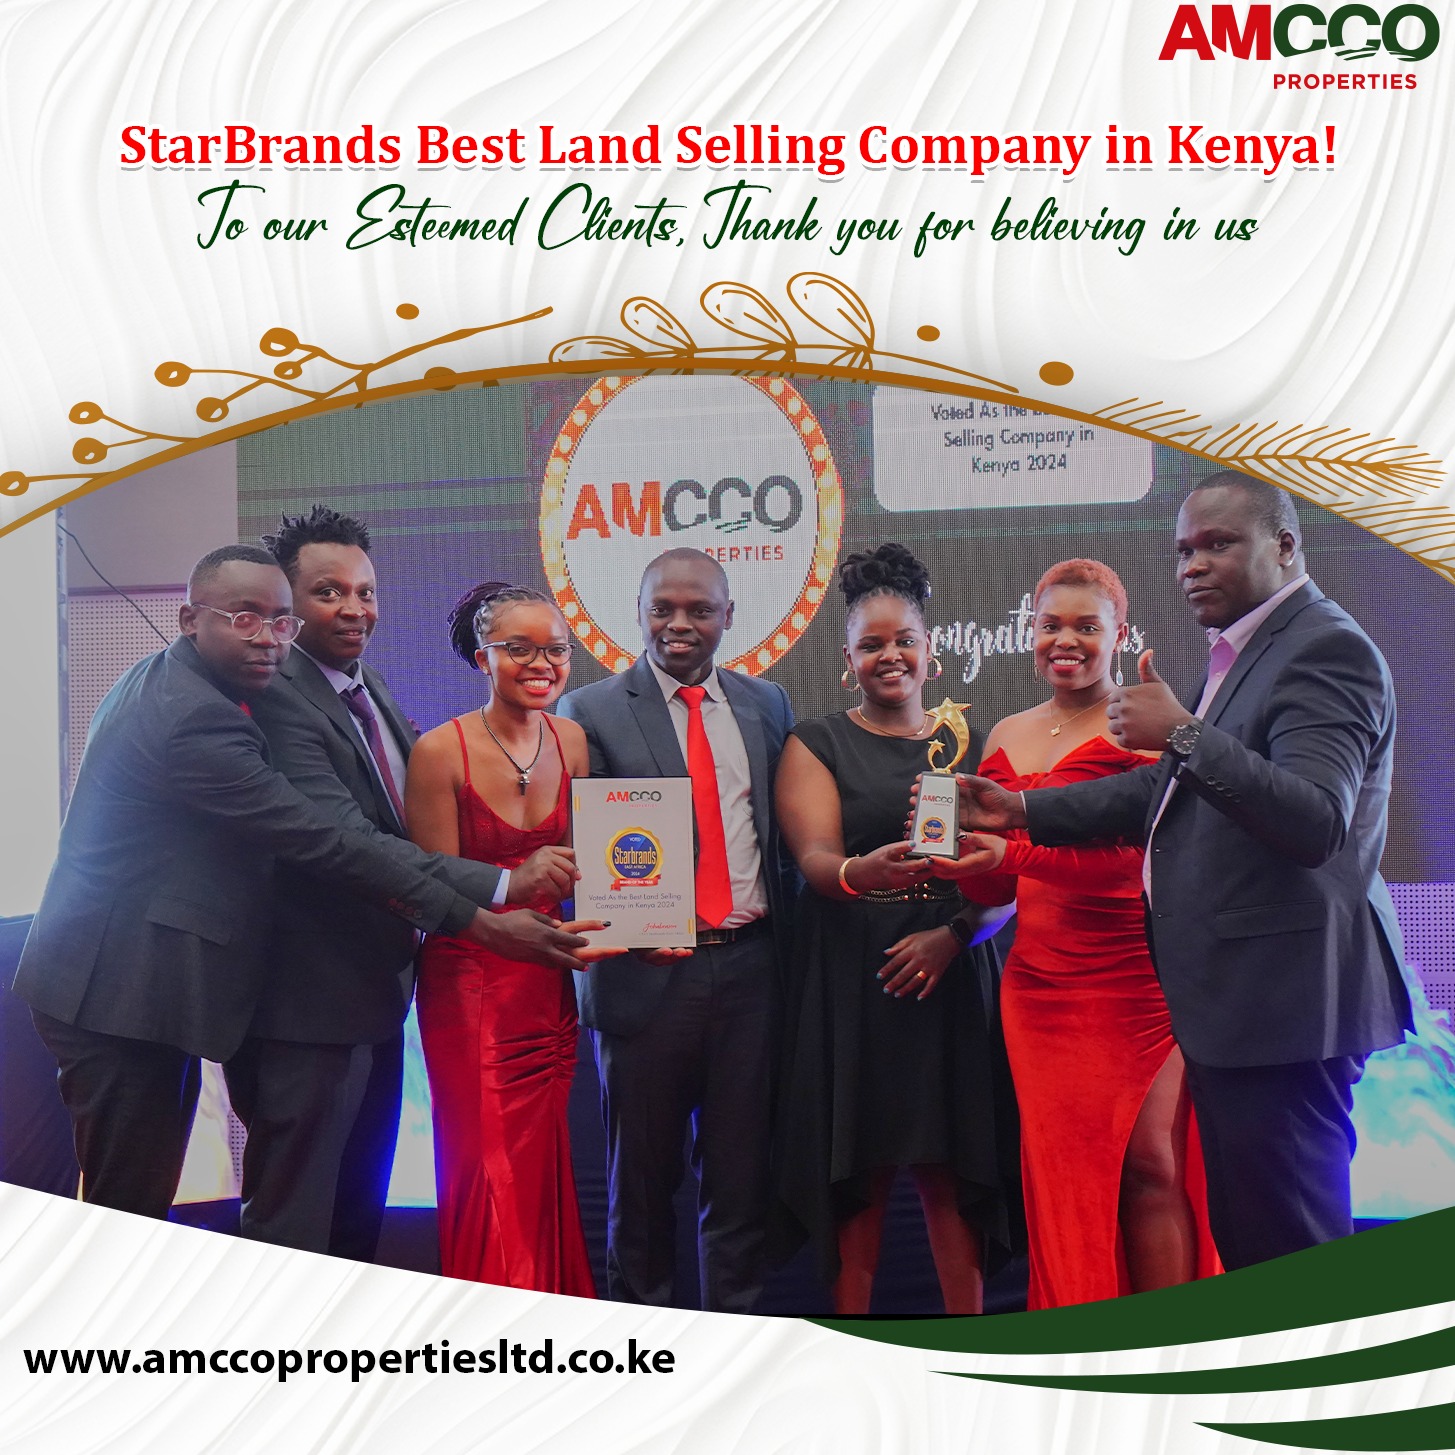 A Triple Win for AMCCO Properties at Starbrands Awards